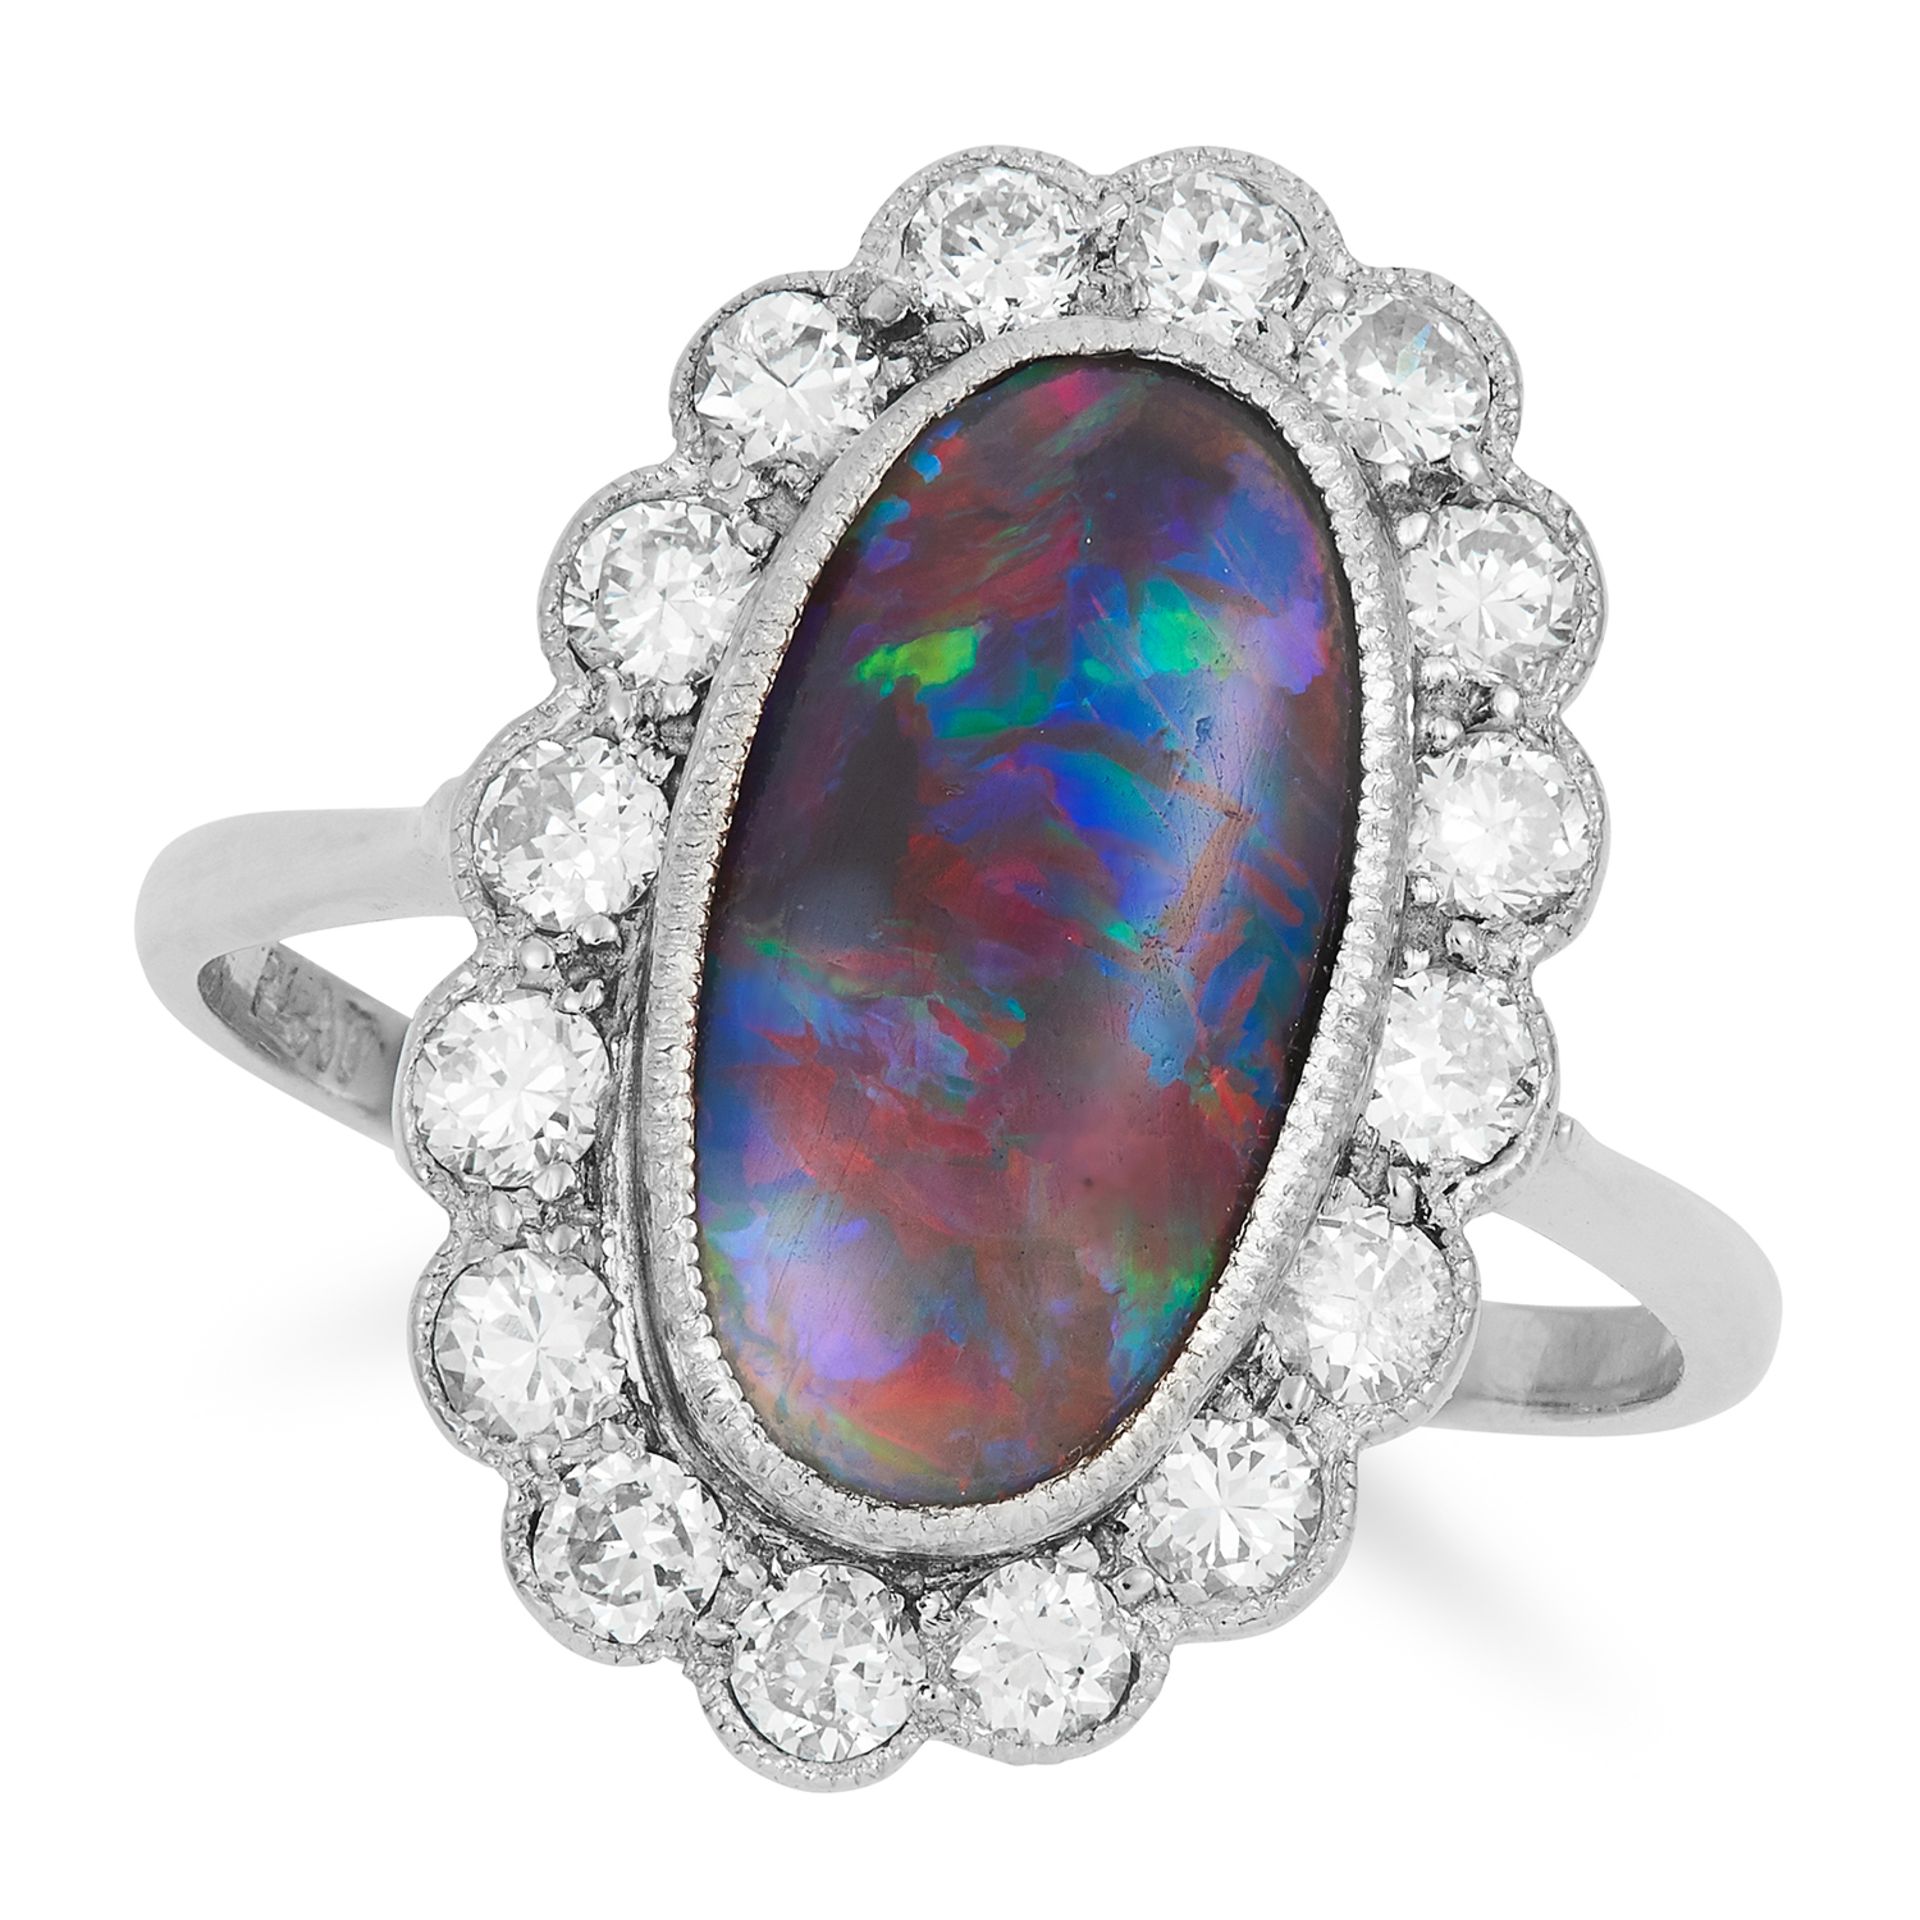 ANTIQUE BLACK OPAL AND DIAMOND CLUSTER RING set with a black opal of approximately 1.87 carats in